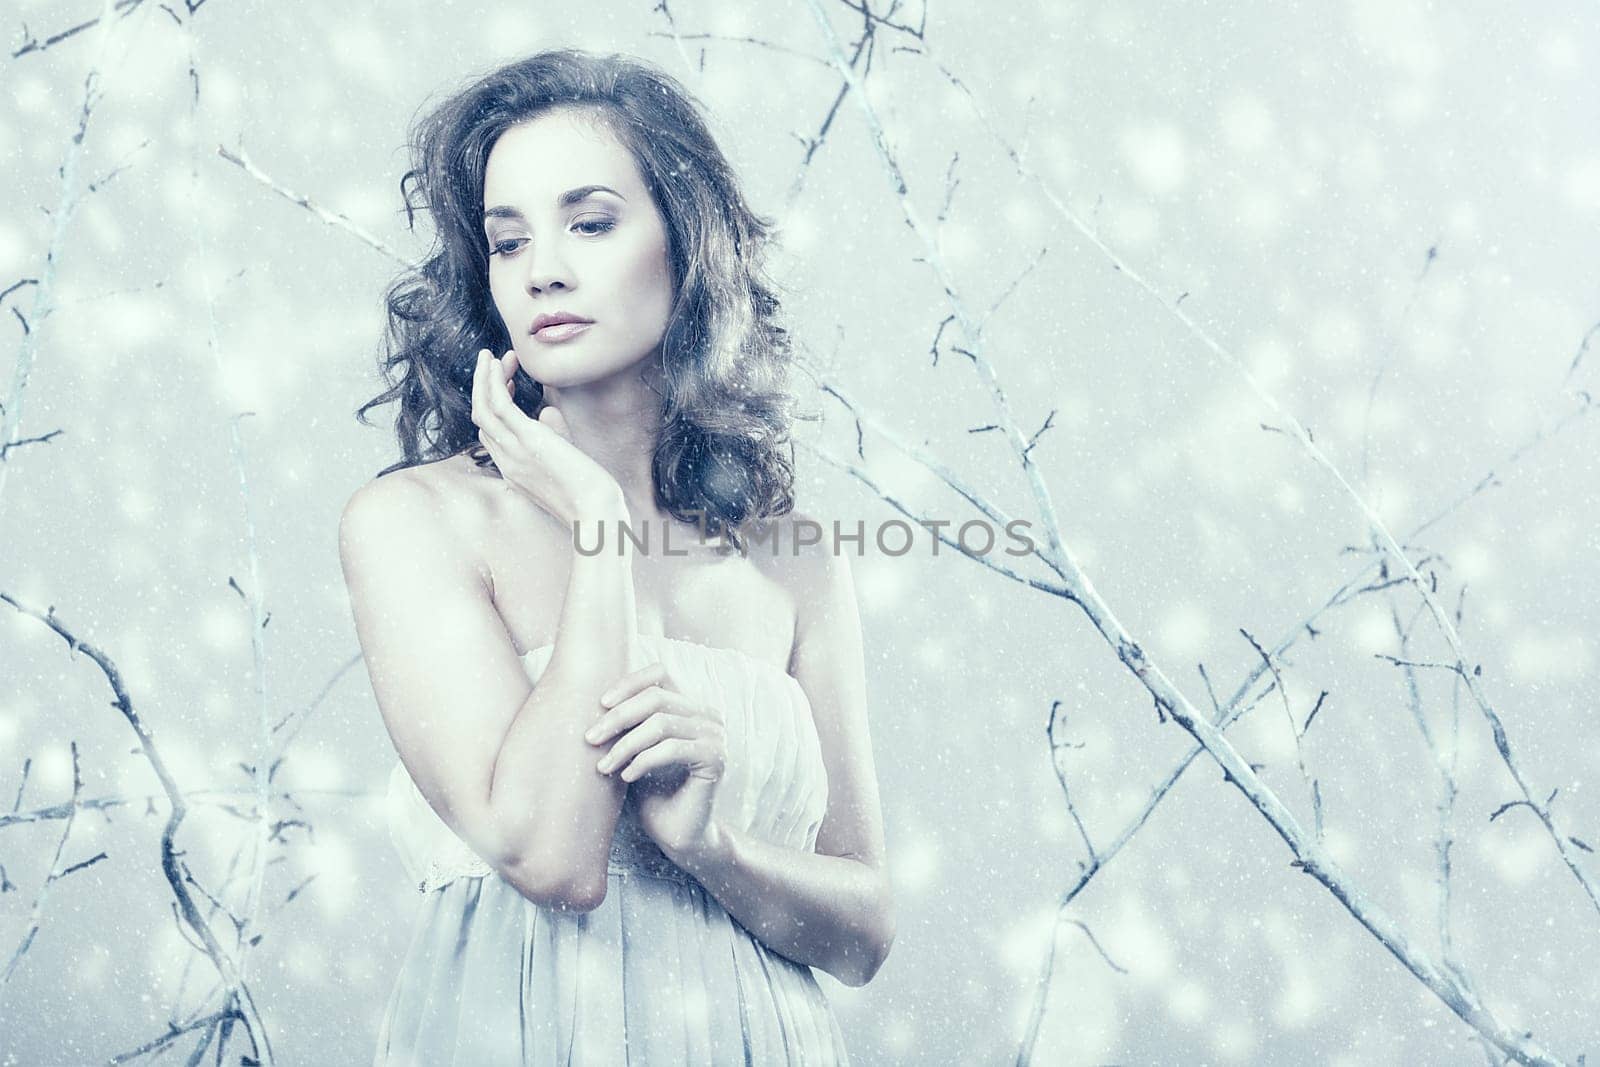 Romantic girl looking away in dress on winter fantasy set up in studio photo. Romantinc and seasonal. Beauty and fashion. Elegance and dream